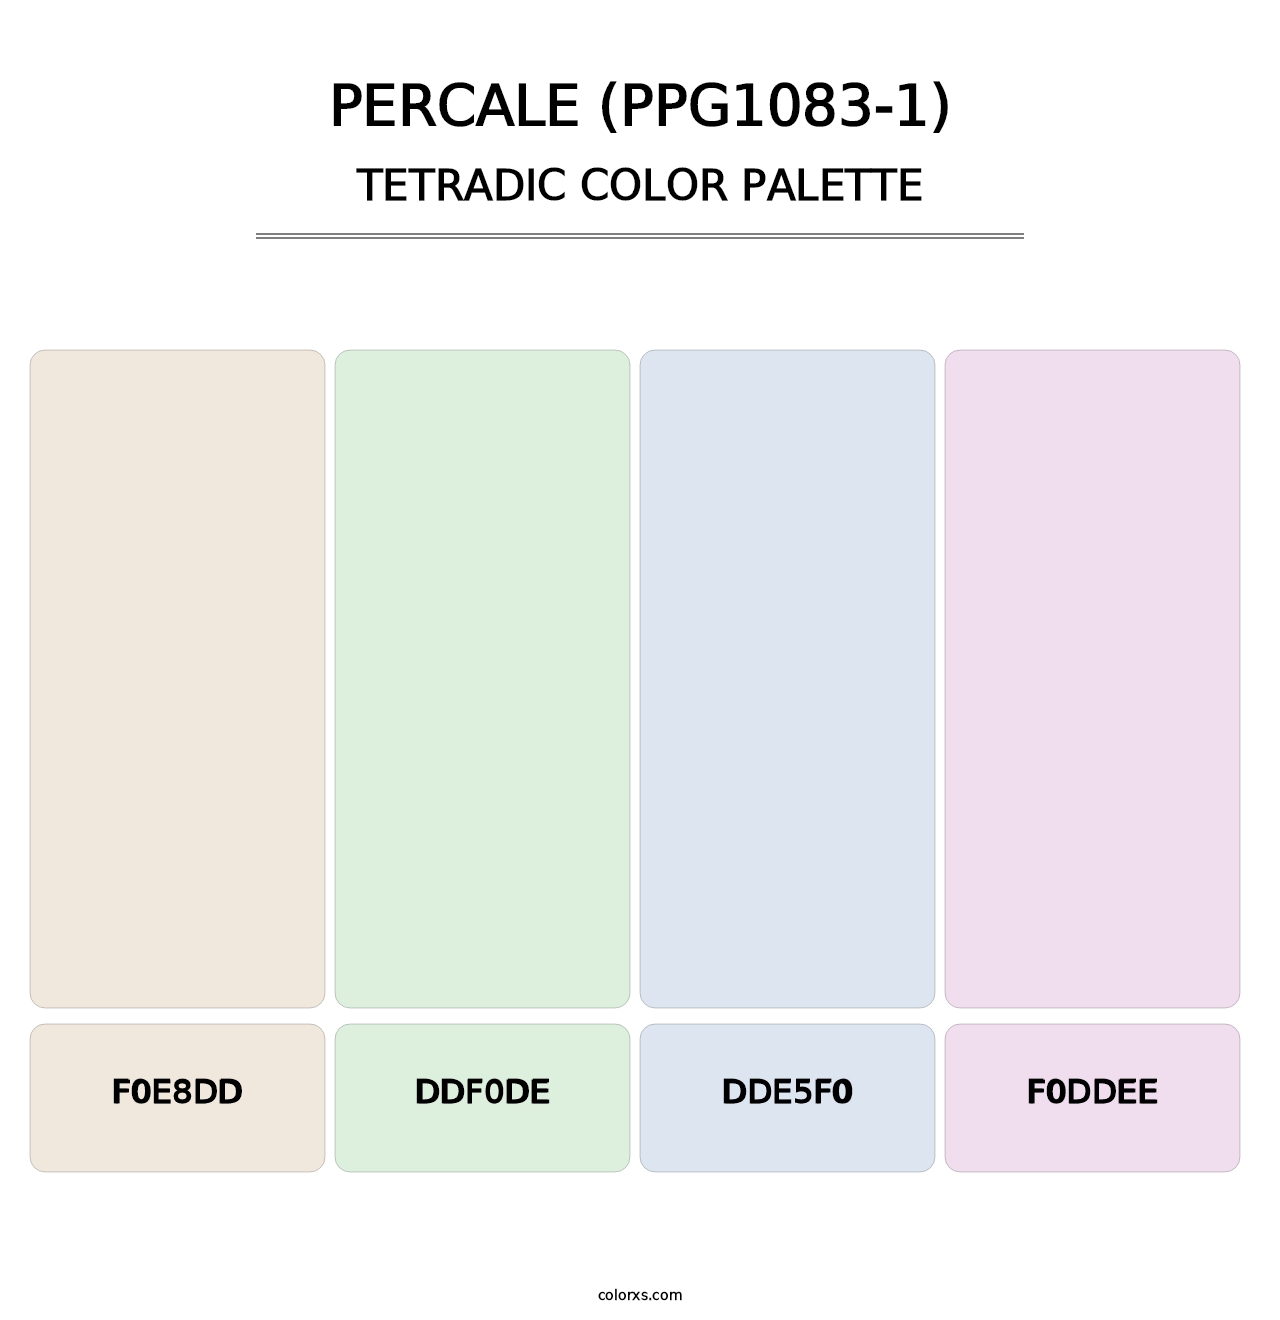 Percale (PPG1083-1) - Tetradic Color Palette